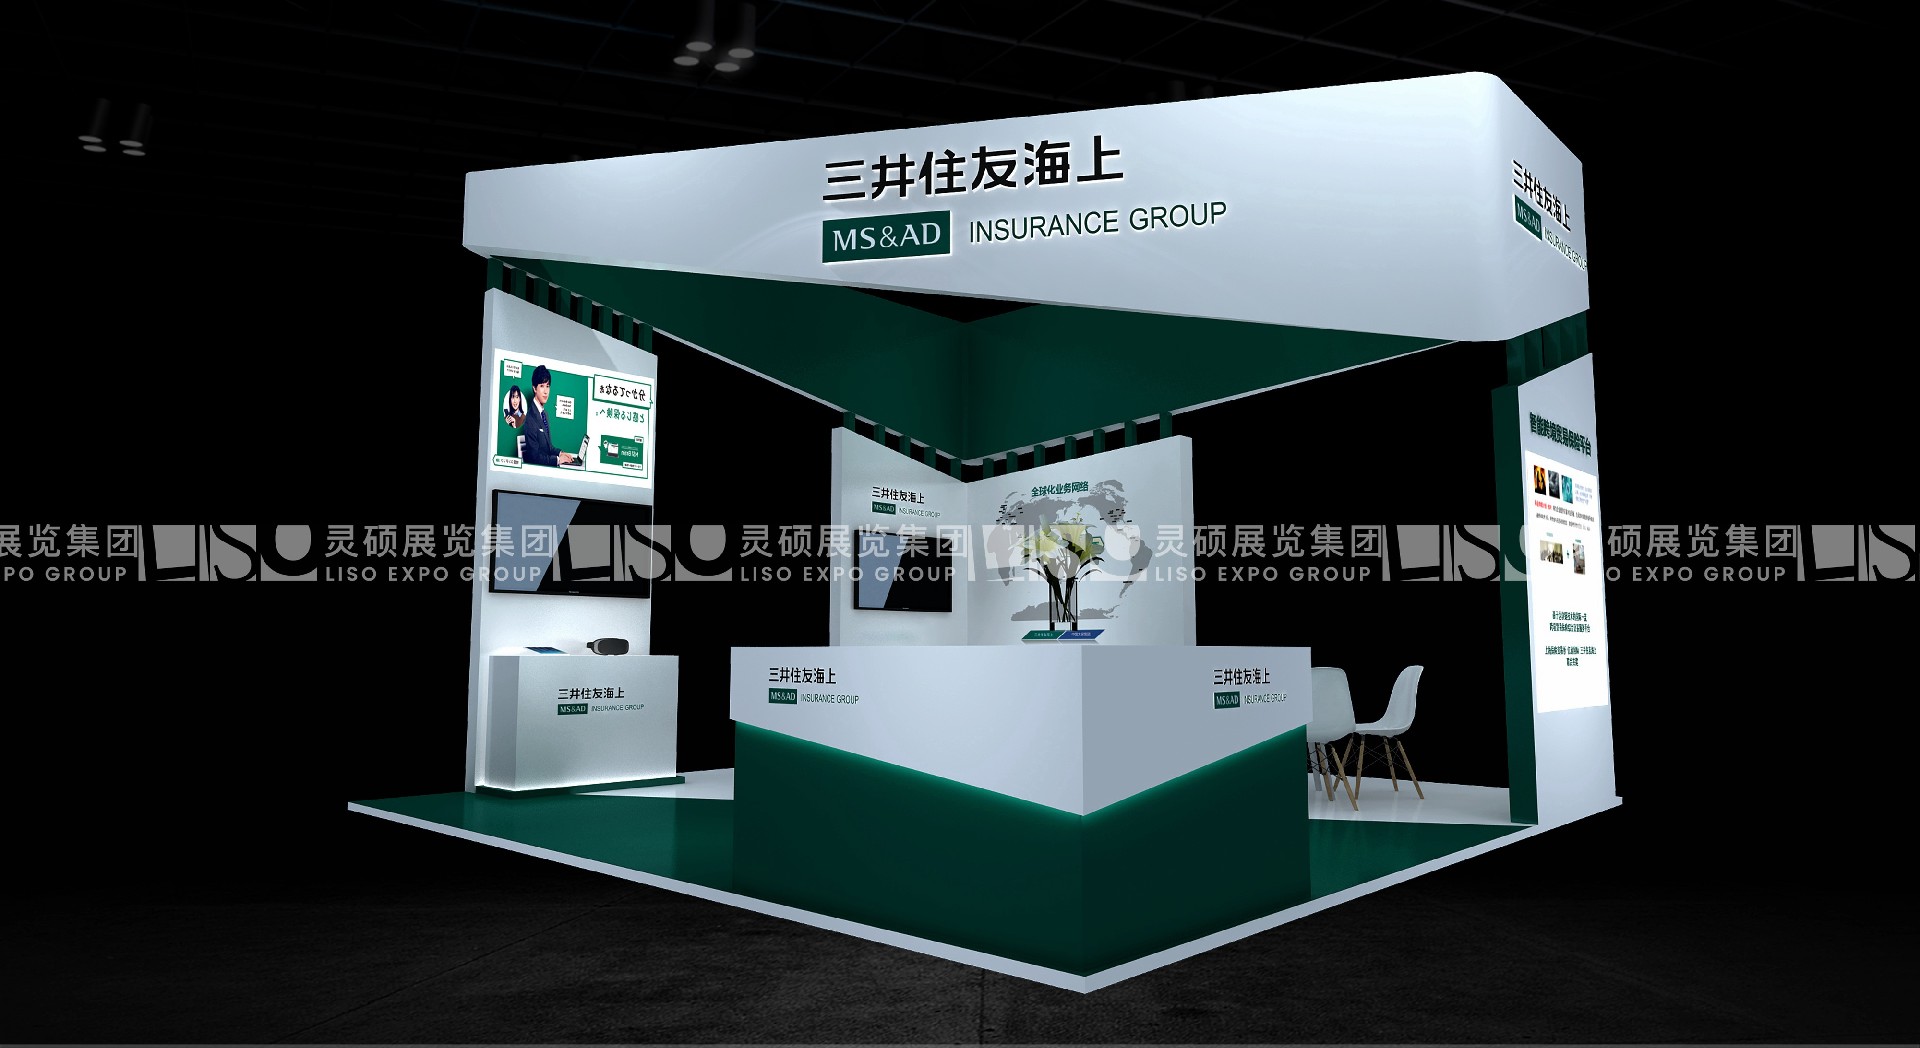 SMBC-CIIE booth design and construction case